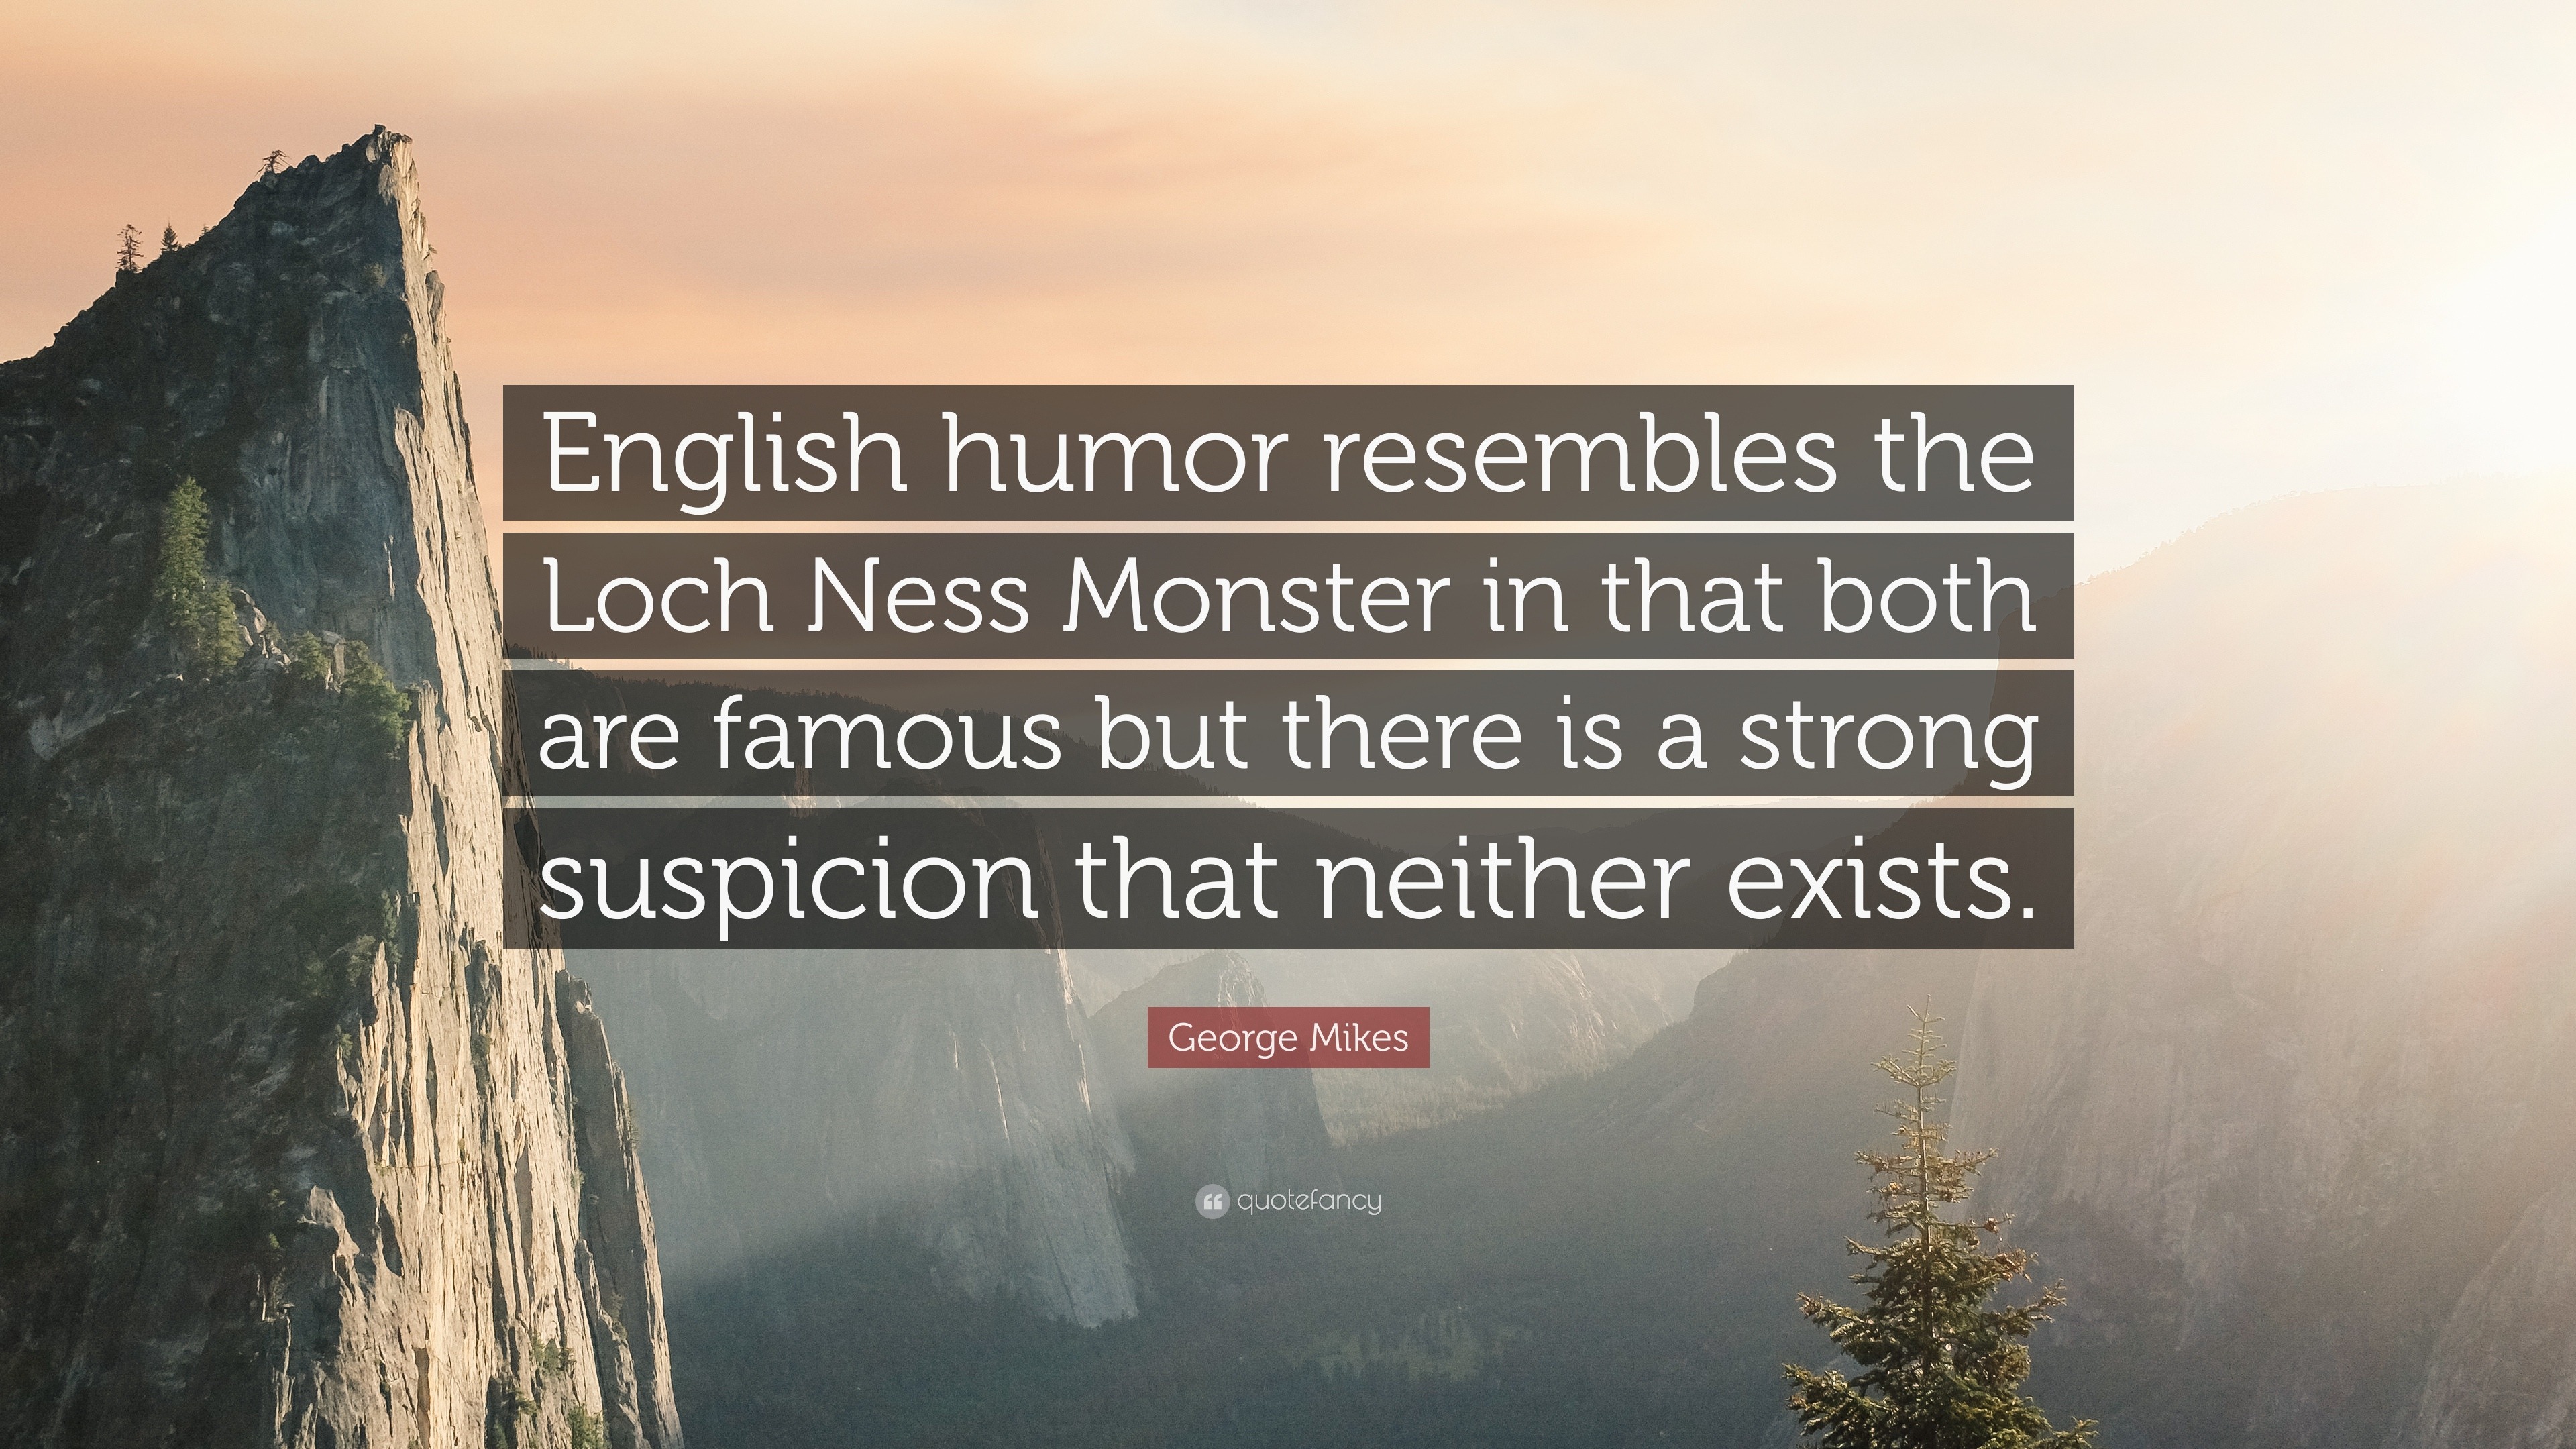 George Mikes Quote: “English humor resembles the Loch Ness Monster in that  both are famous but there is a strong suspicion that neither exist...”